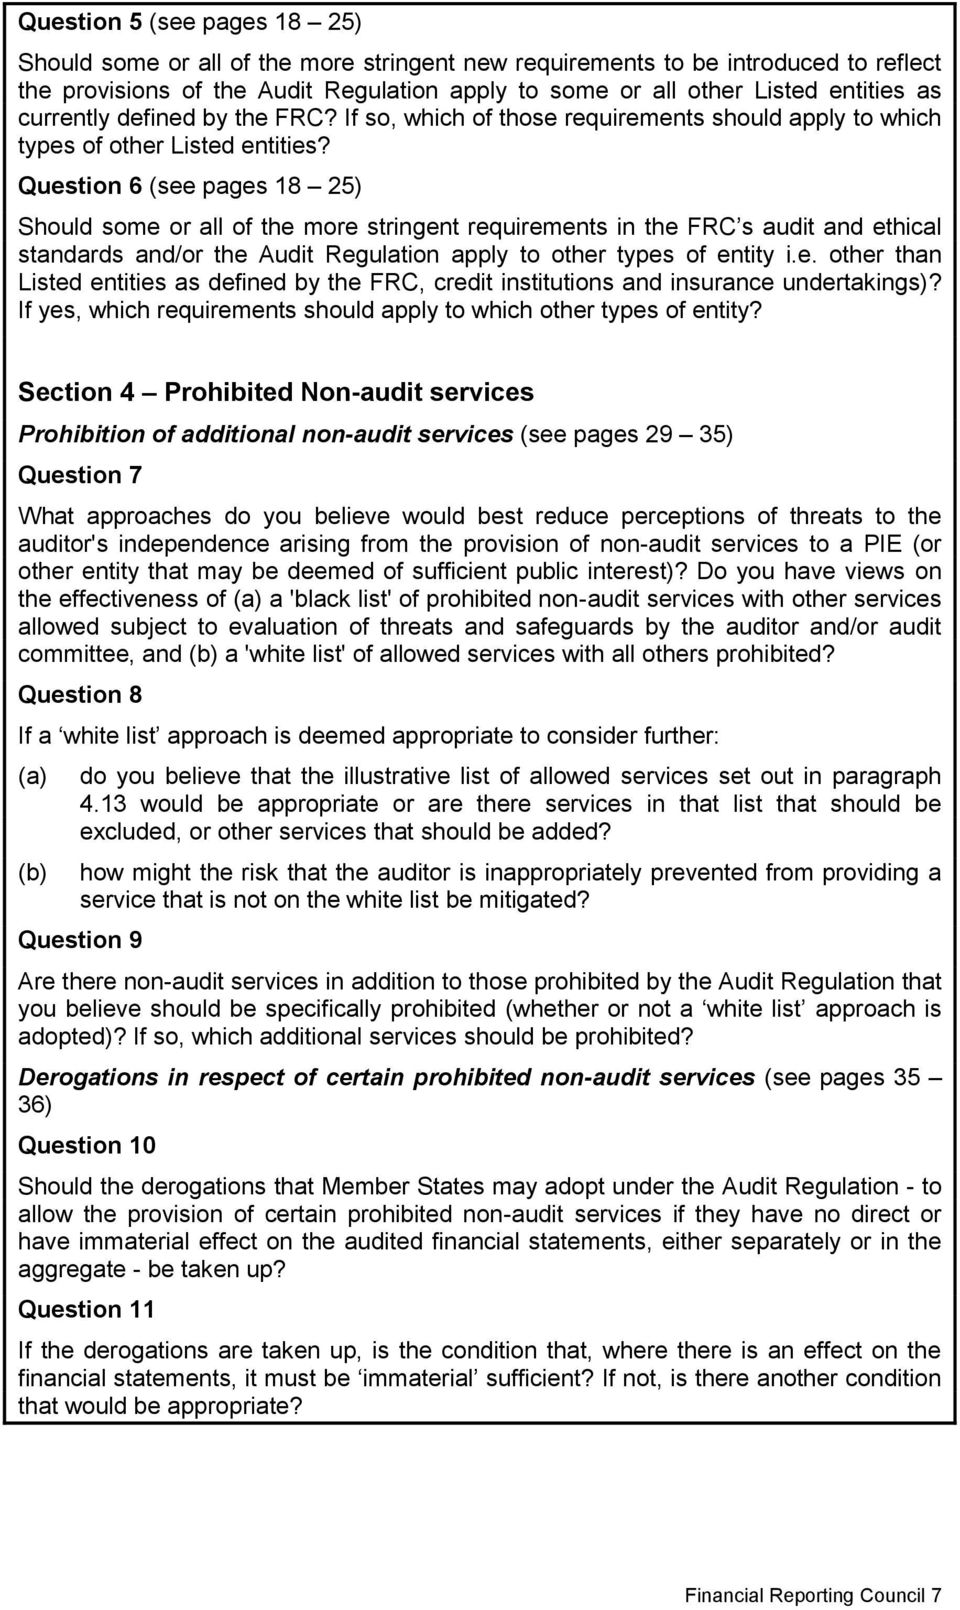 Question 6 (see pages 18 25) Should some or all of the more stringent requirements in the FRC s audit and ethical standards and/or the Audit Regulation apply to other types of entity i.e. other than Listed entities as defined by the FRC, credit institutions and insurance undertakings)?